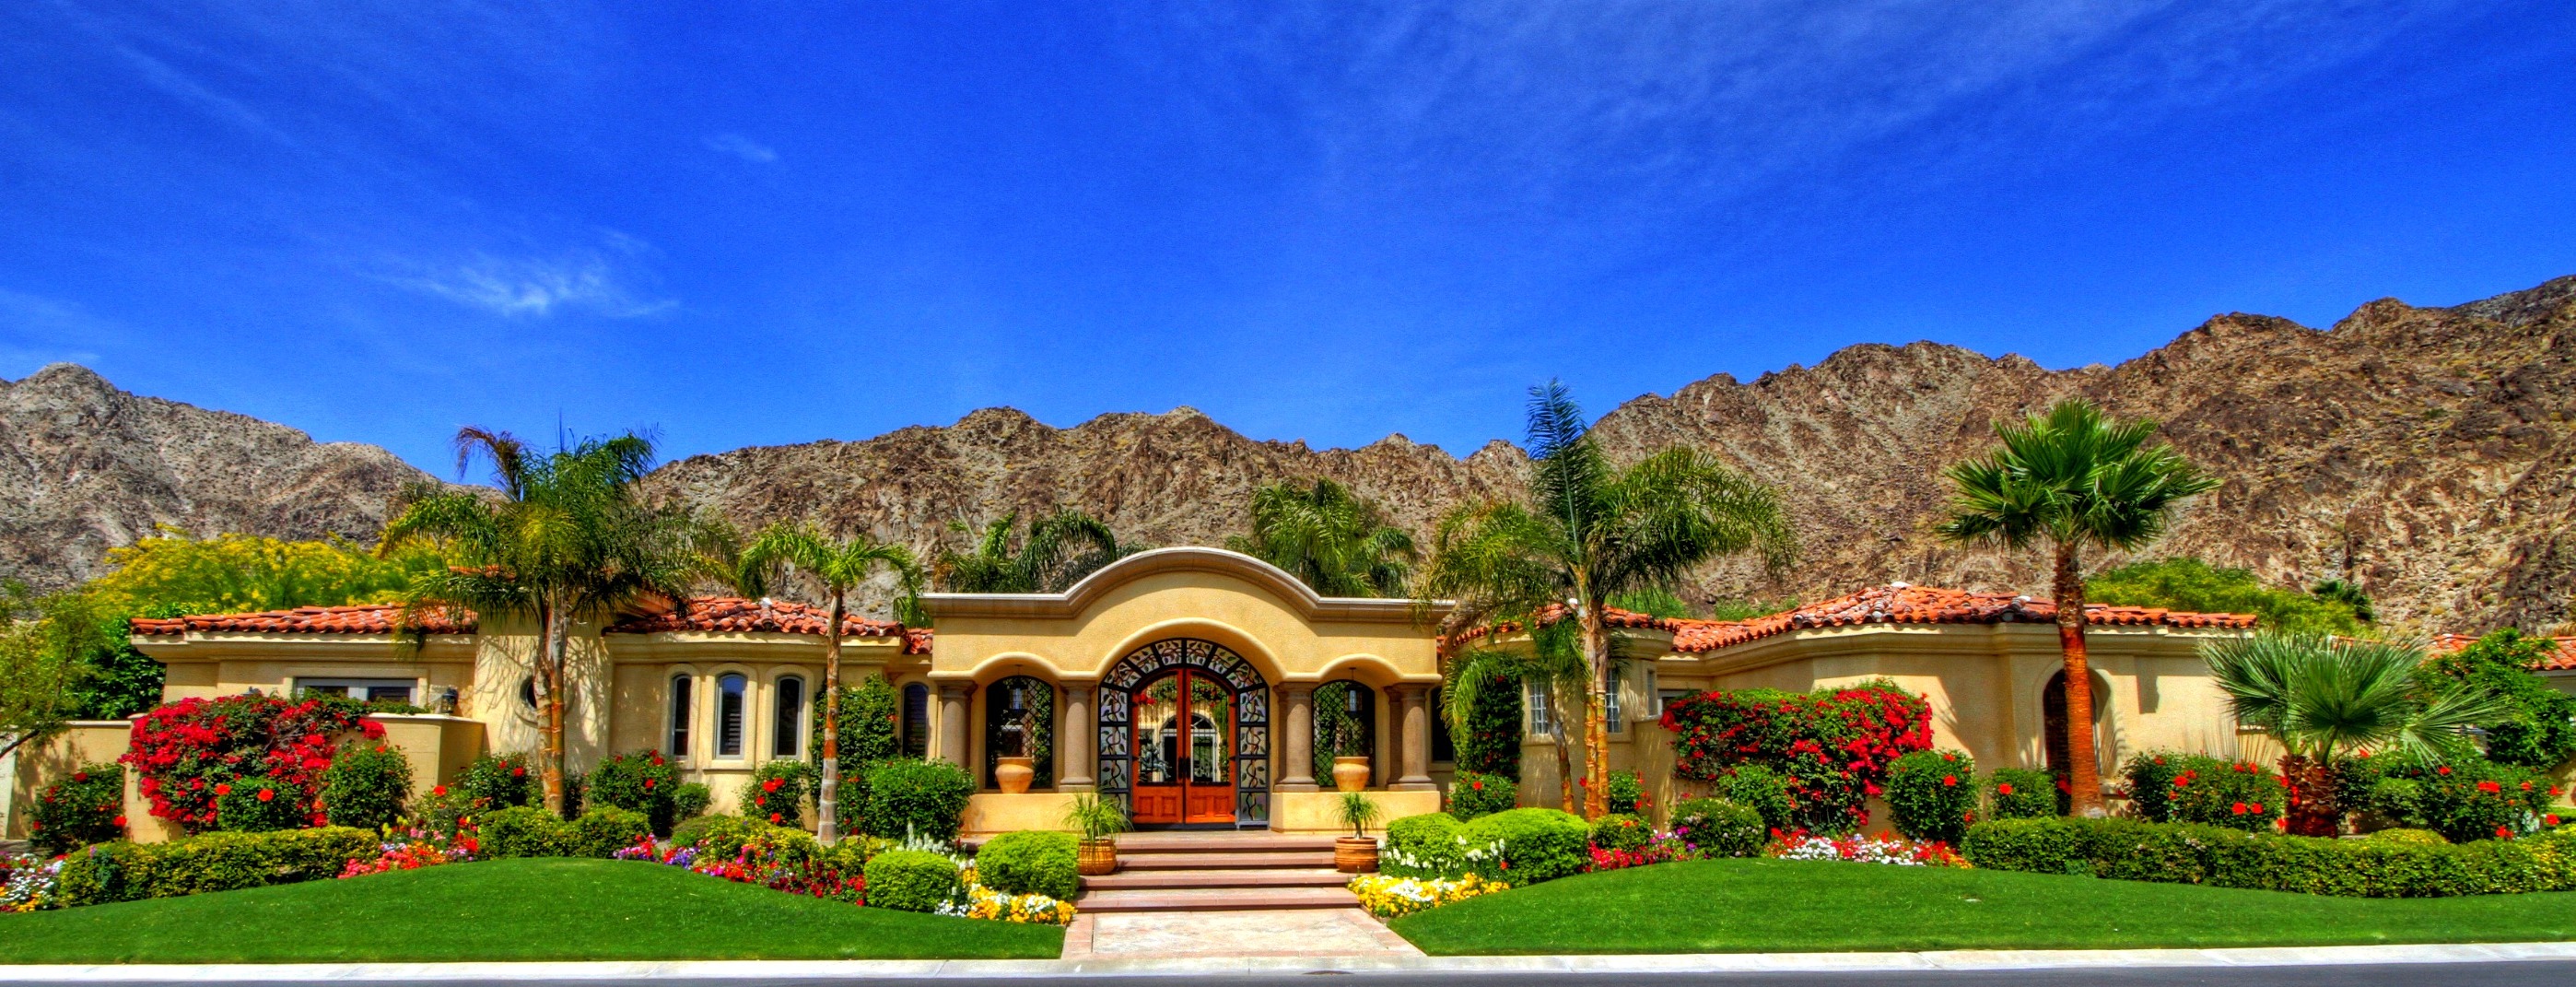 Sizzling La Quinta Real Estate Market Offers Incredible Value in Luxury ...